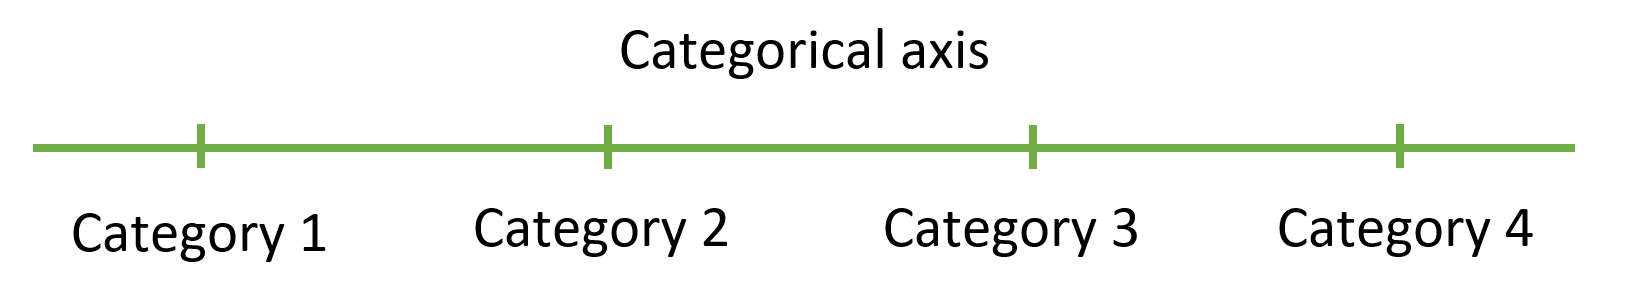 Categorical axis